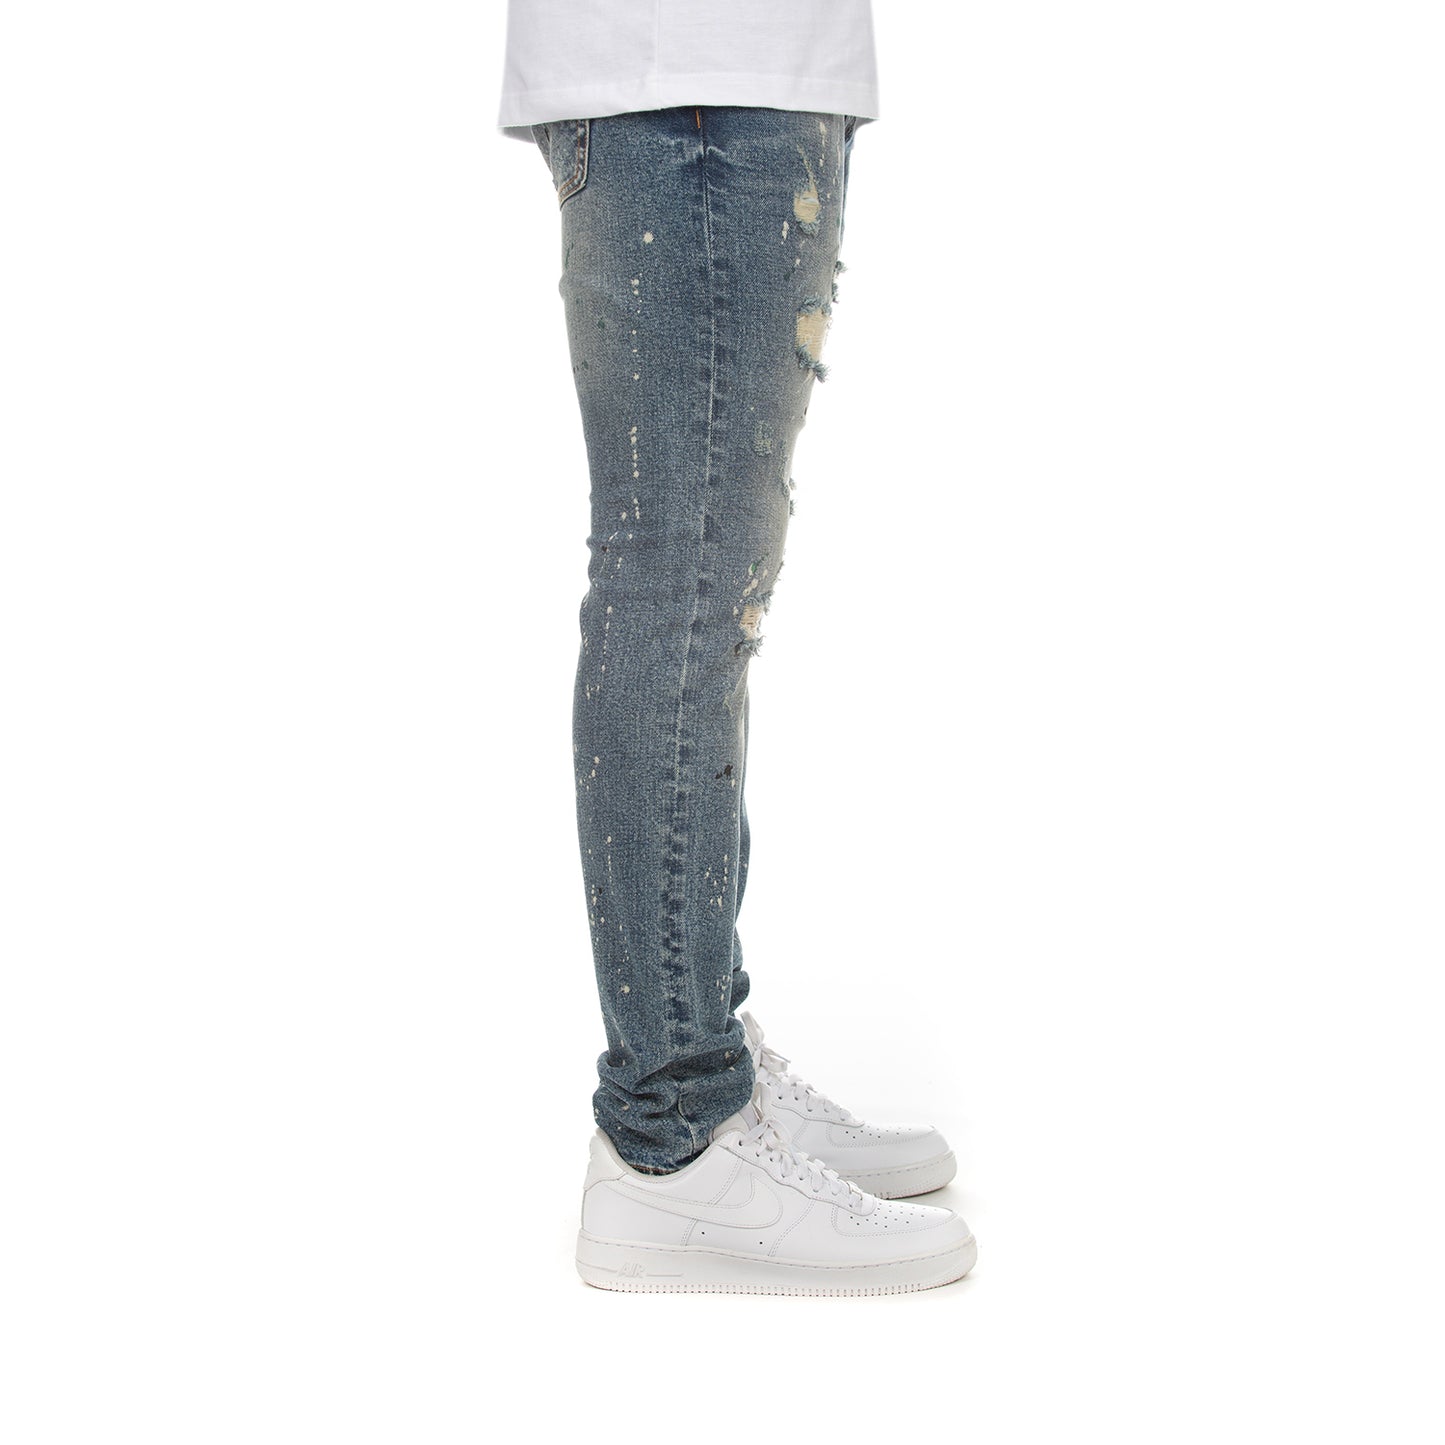 Distressed Slim Fit Jeans with White Paint Splatters - Dark Wash - Trendy and Edgy - Lenox Jean